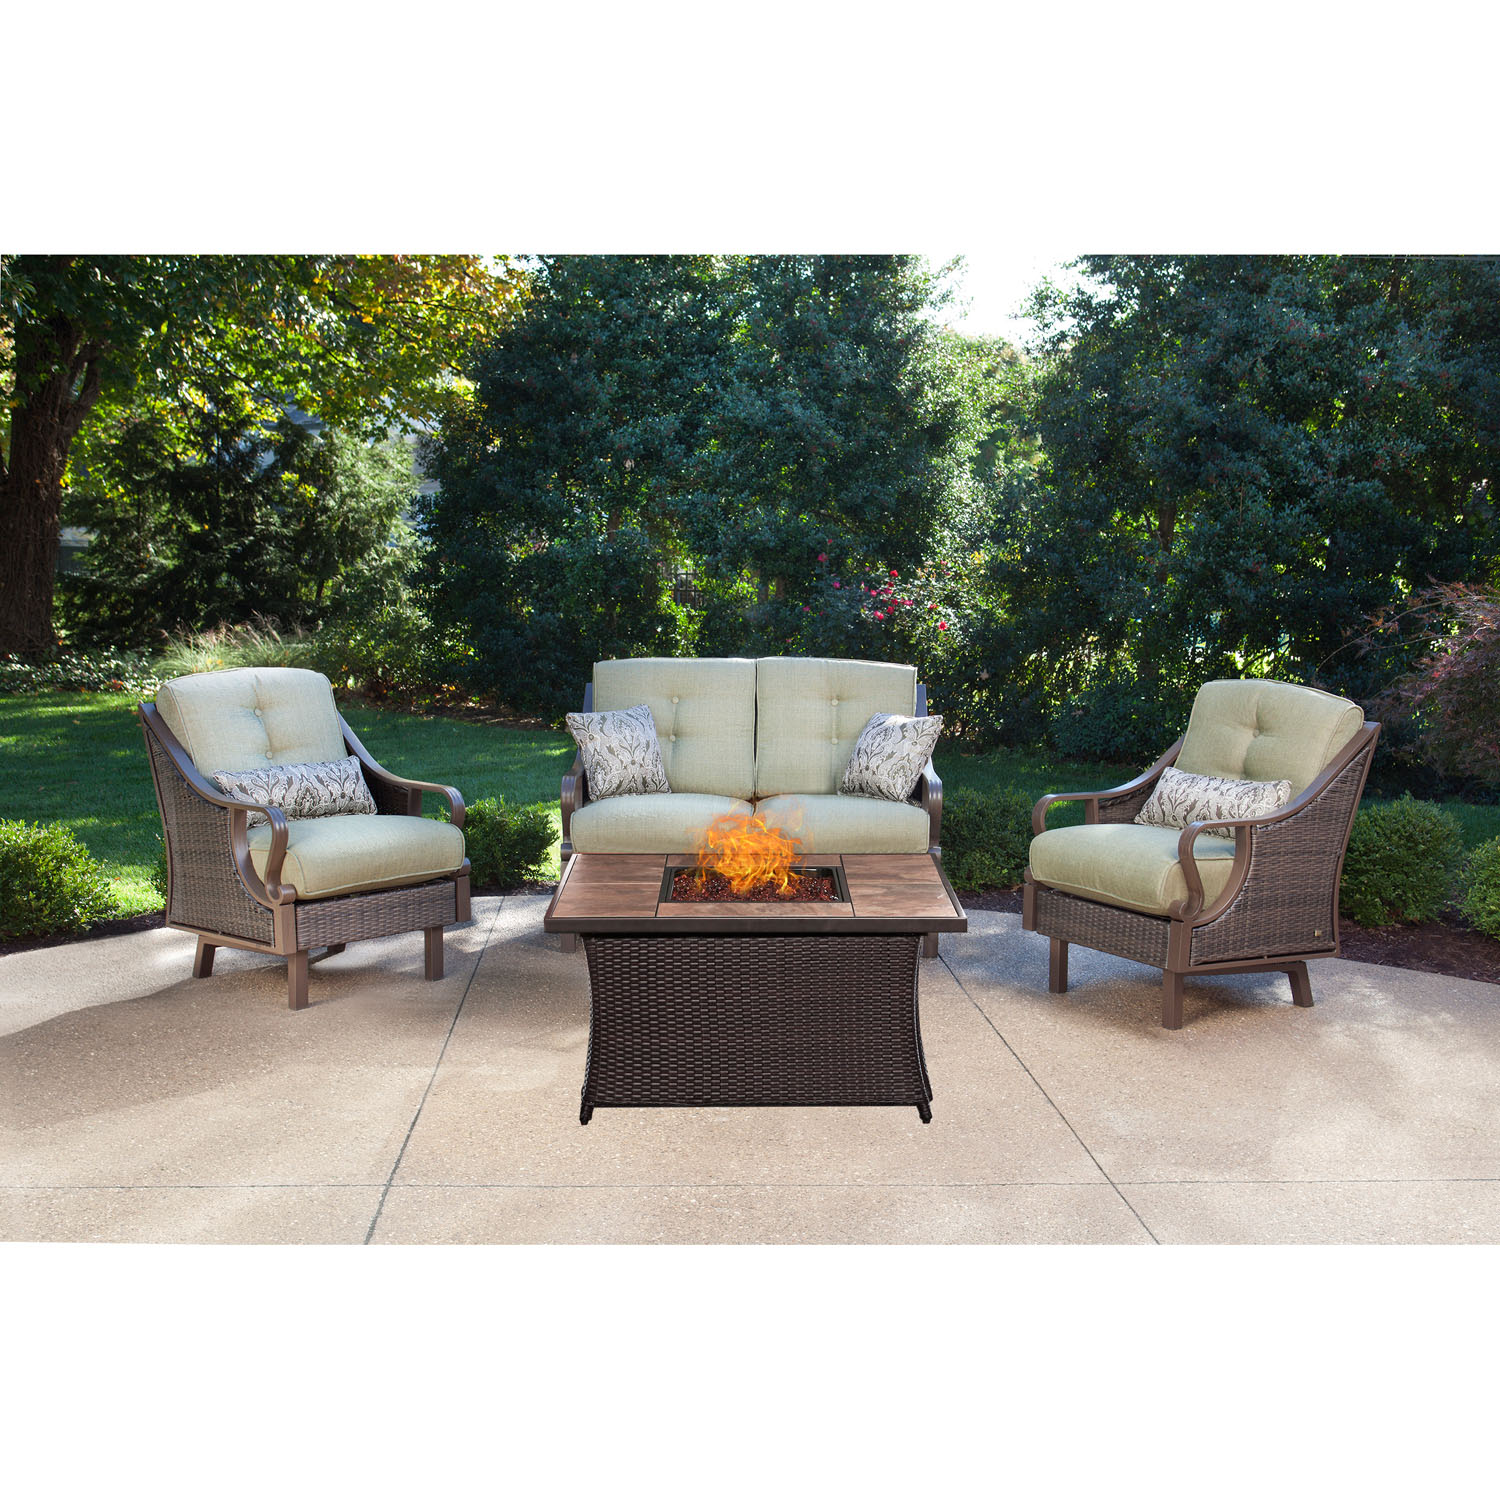 Hanover Ventura 4 Pcs Wicker and Steel Propane Fire Pit Chat Set, Vintage Meadow - image 1 of 11